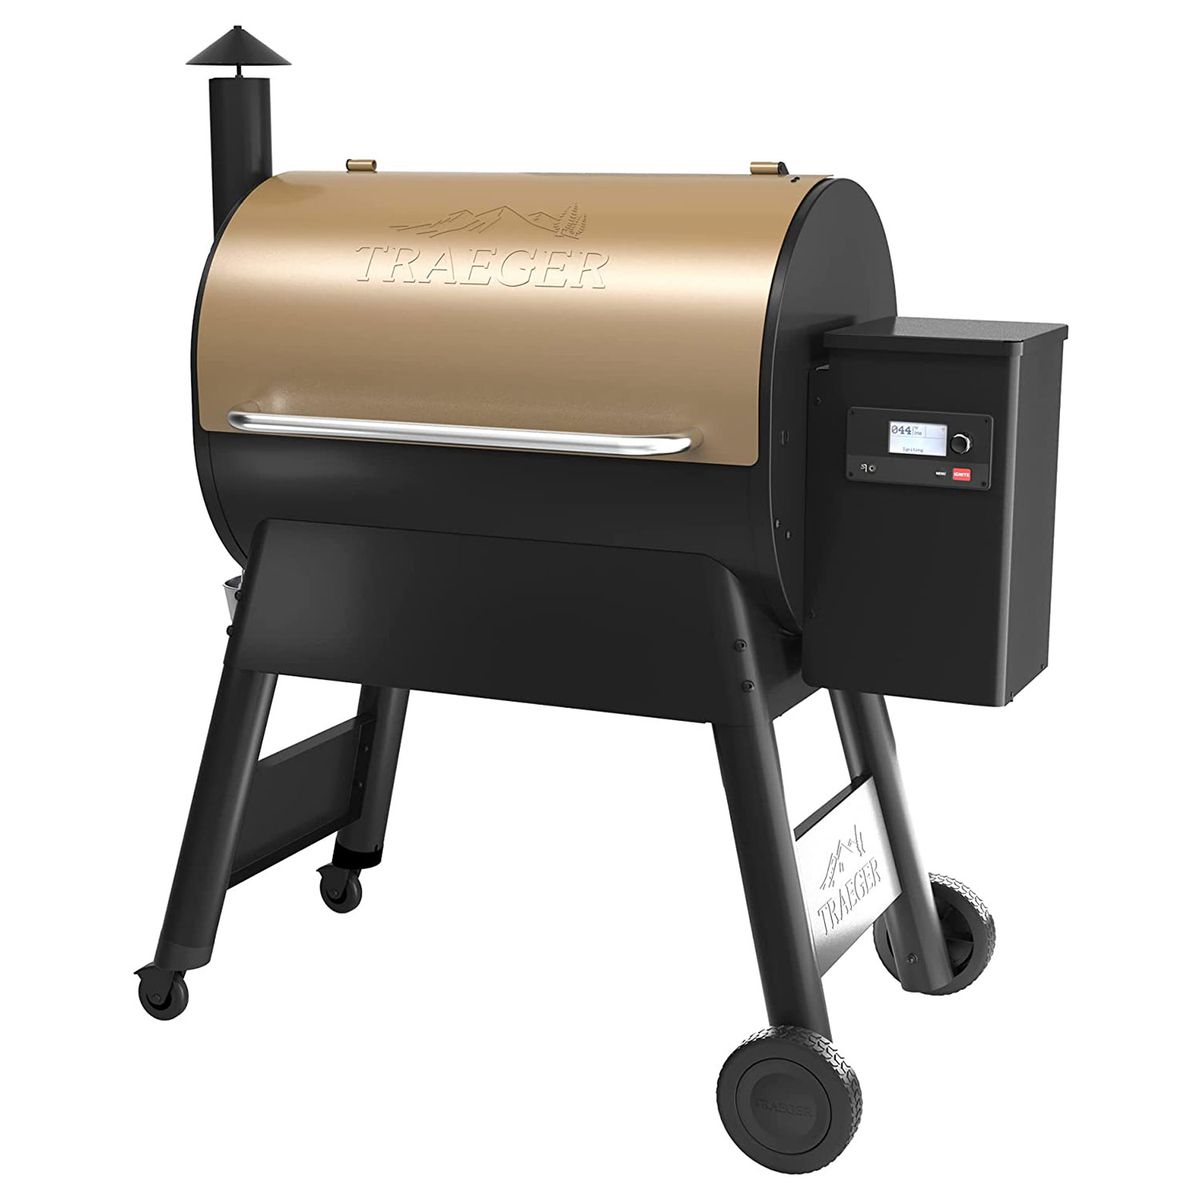 Traeger Grills Pro Series 780 Wood Pellet Grill and Smoker with Alexa